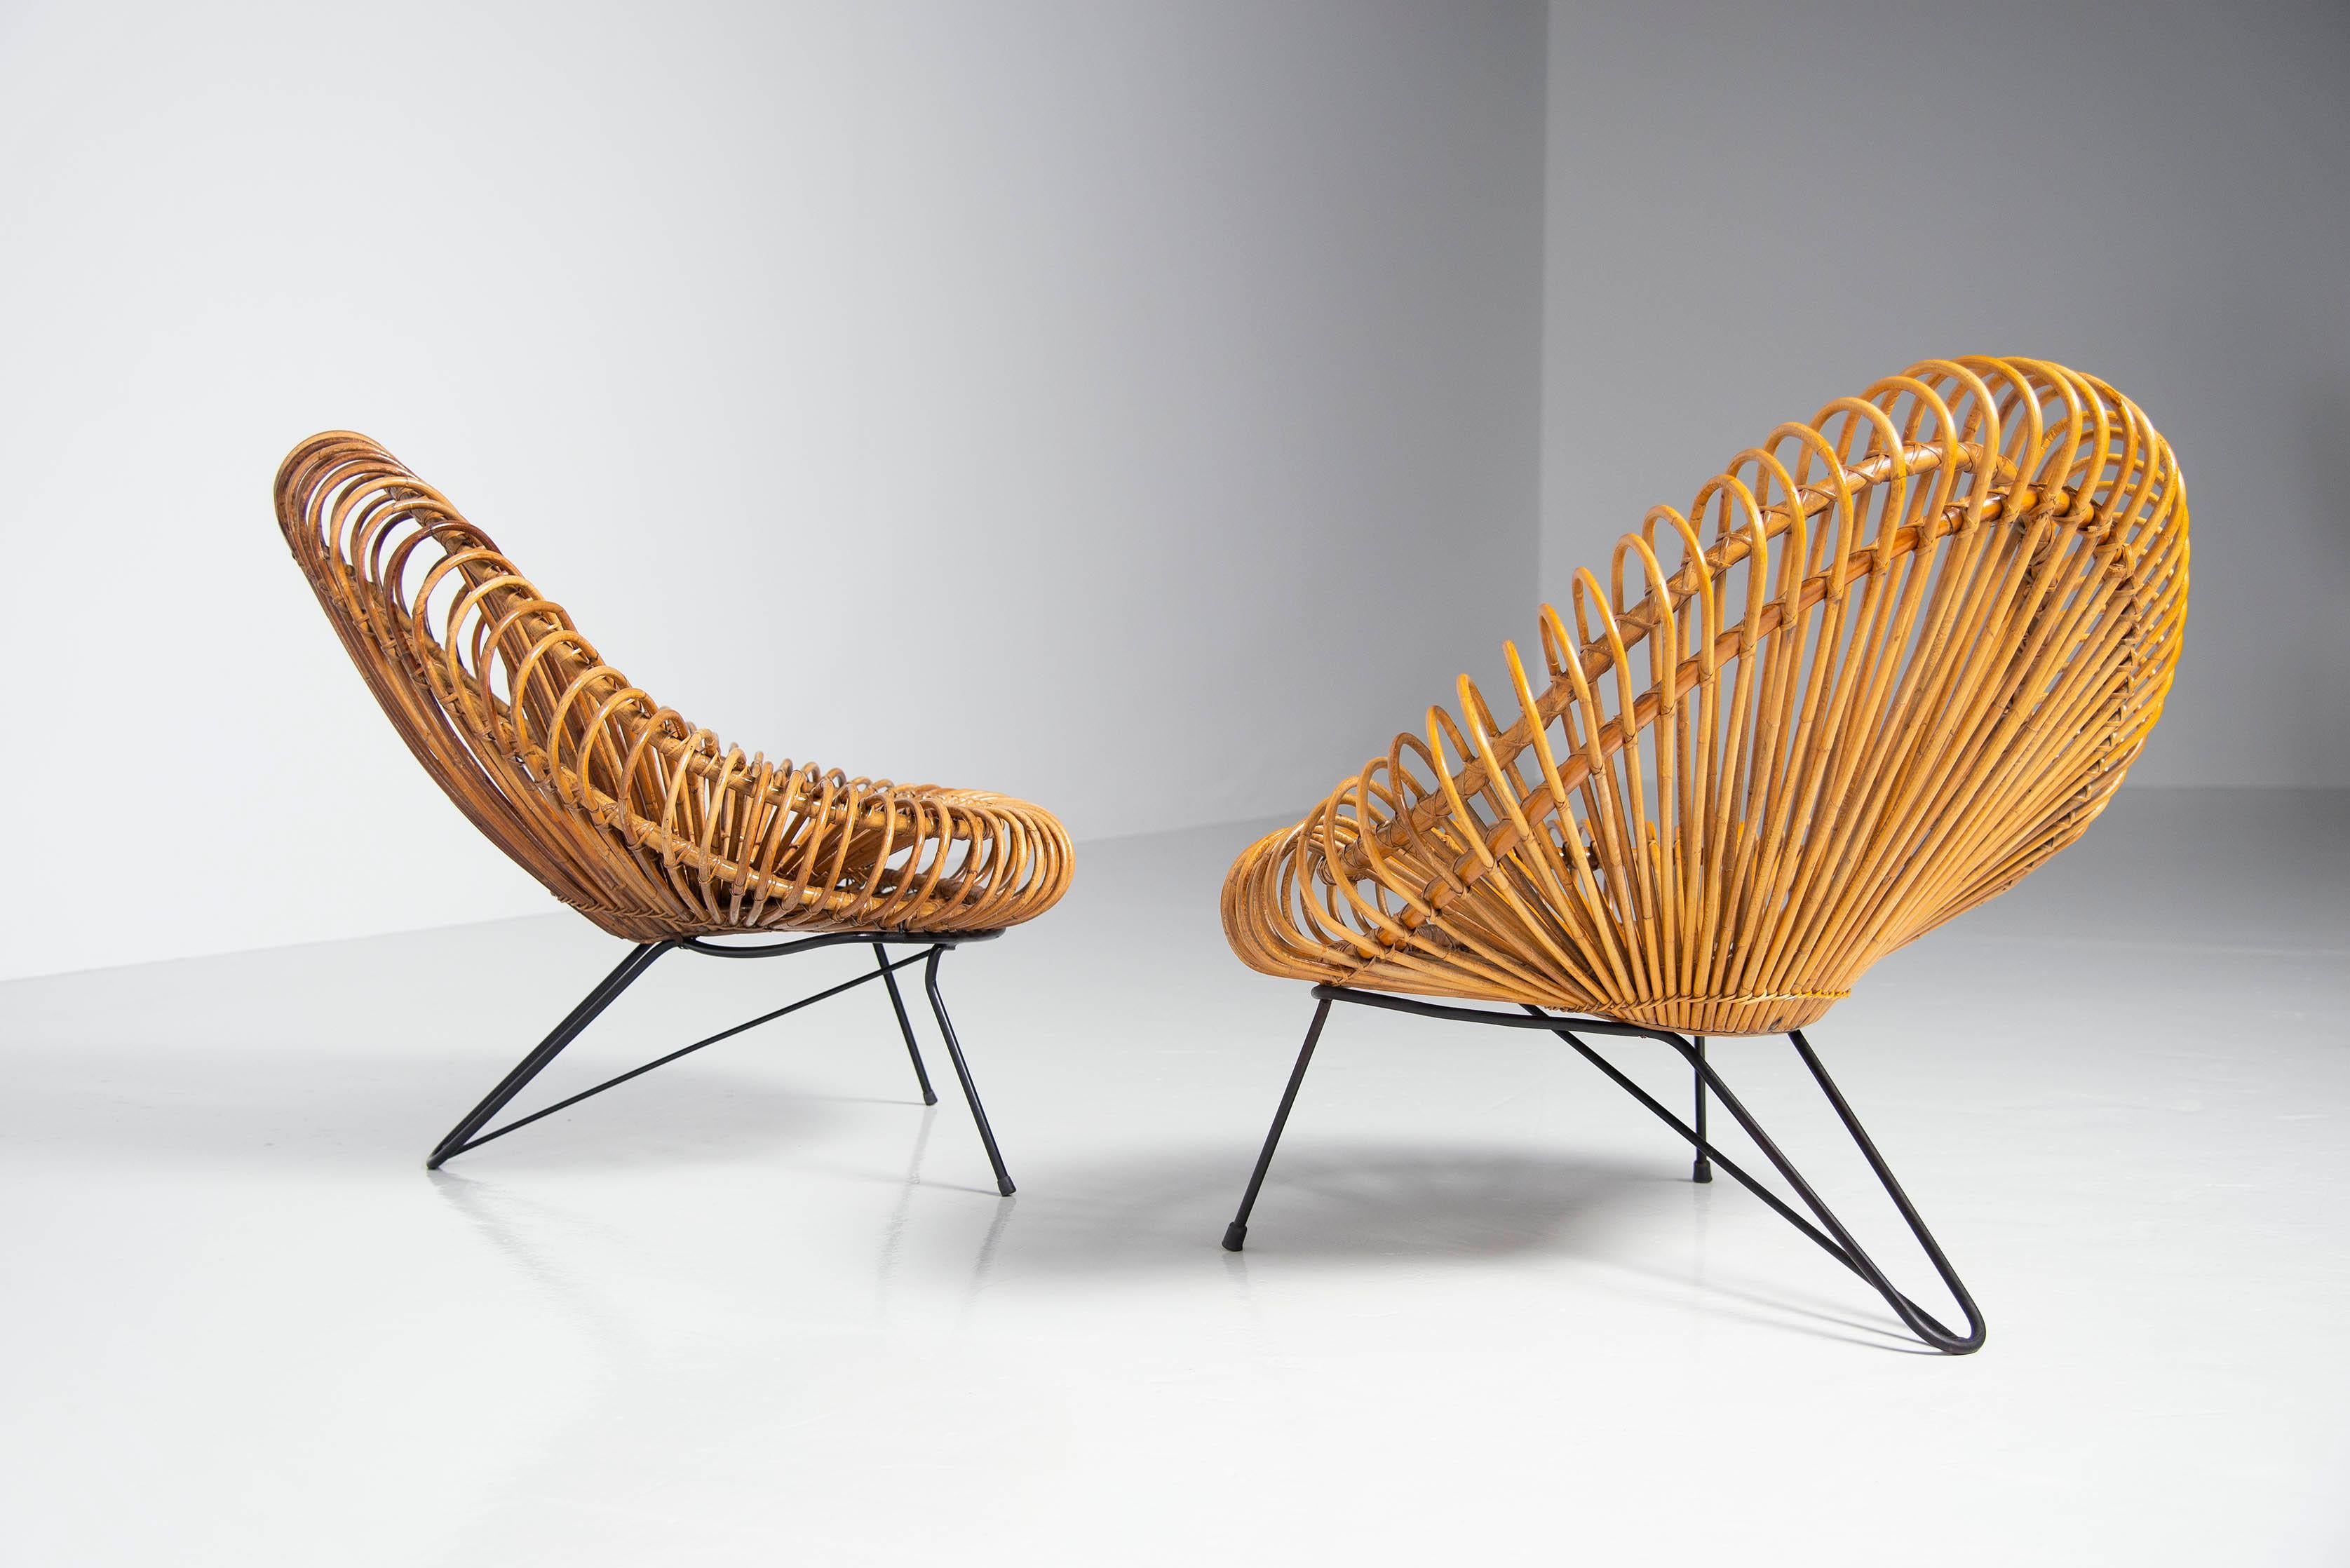 Steel Janine Abraham & Dirk Jan Rol Lounge Chairs France 1950 For Sale